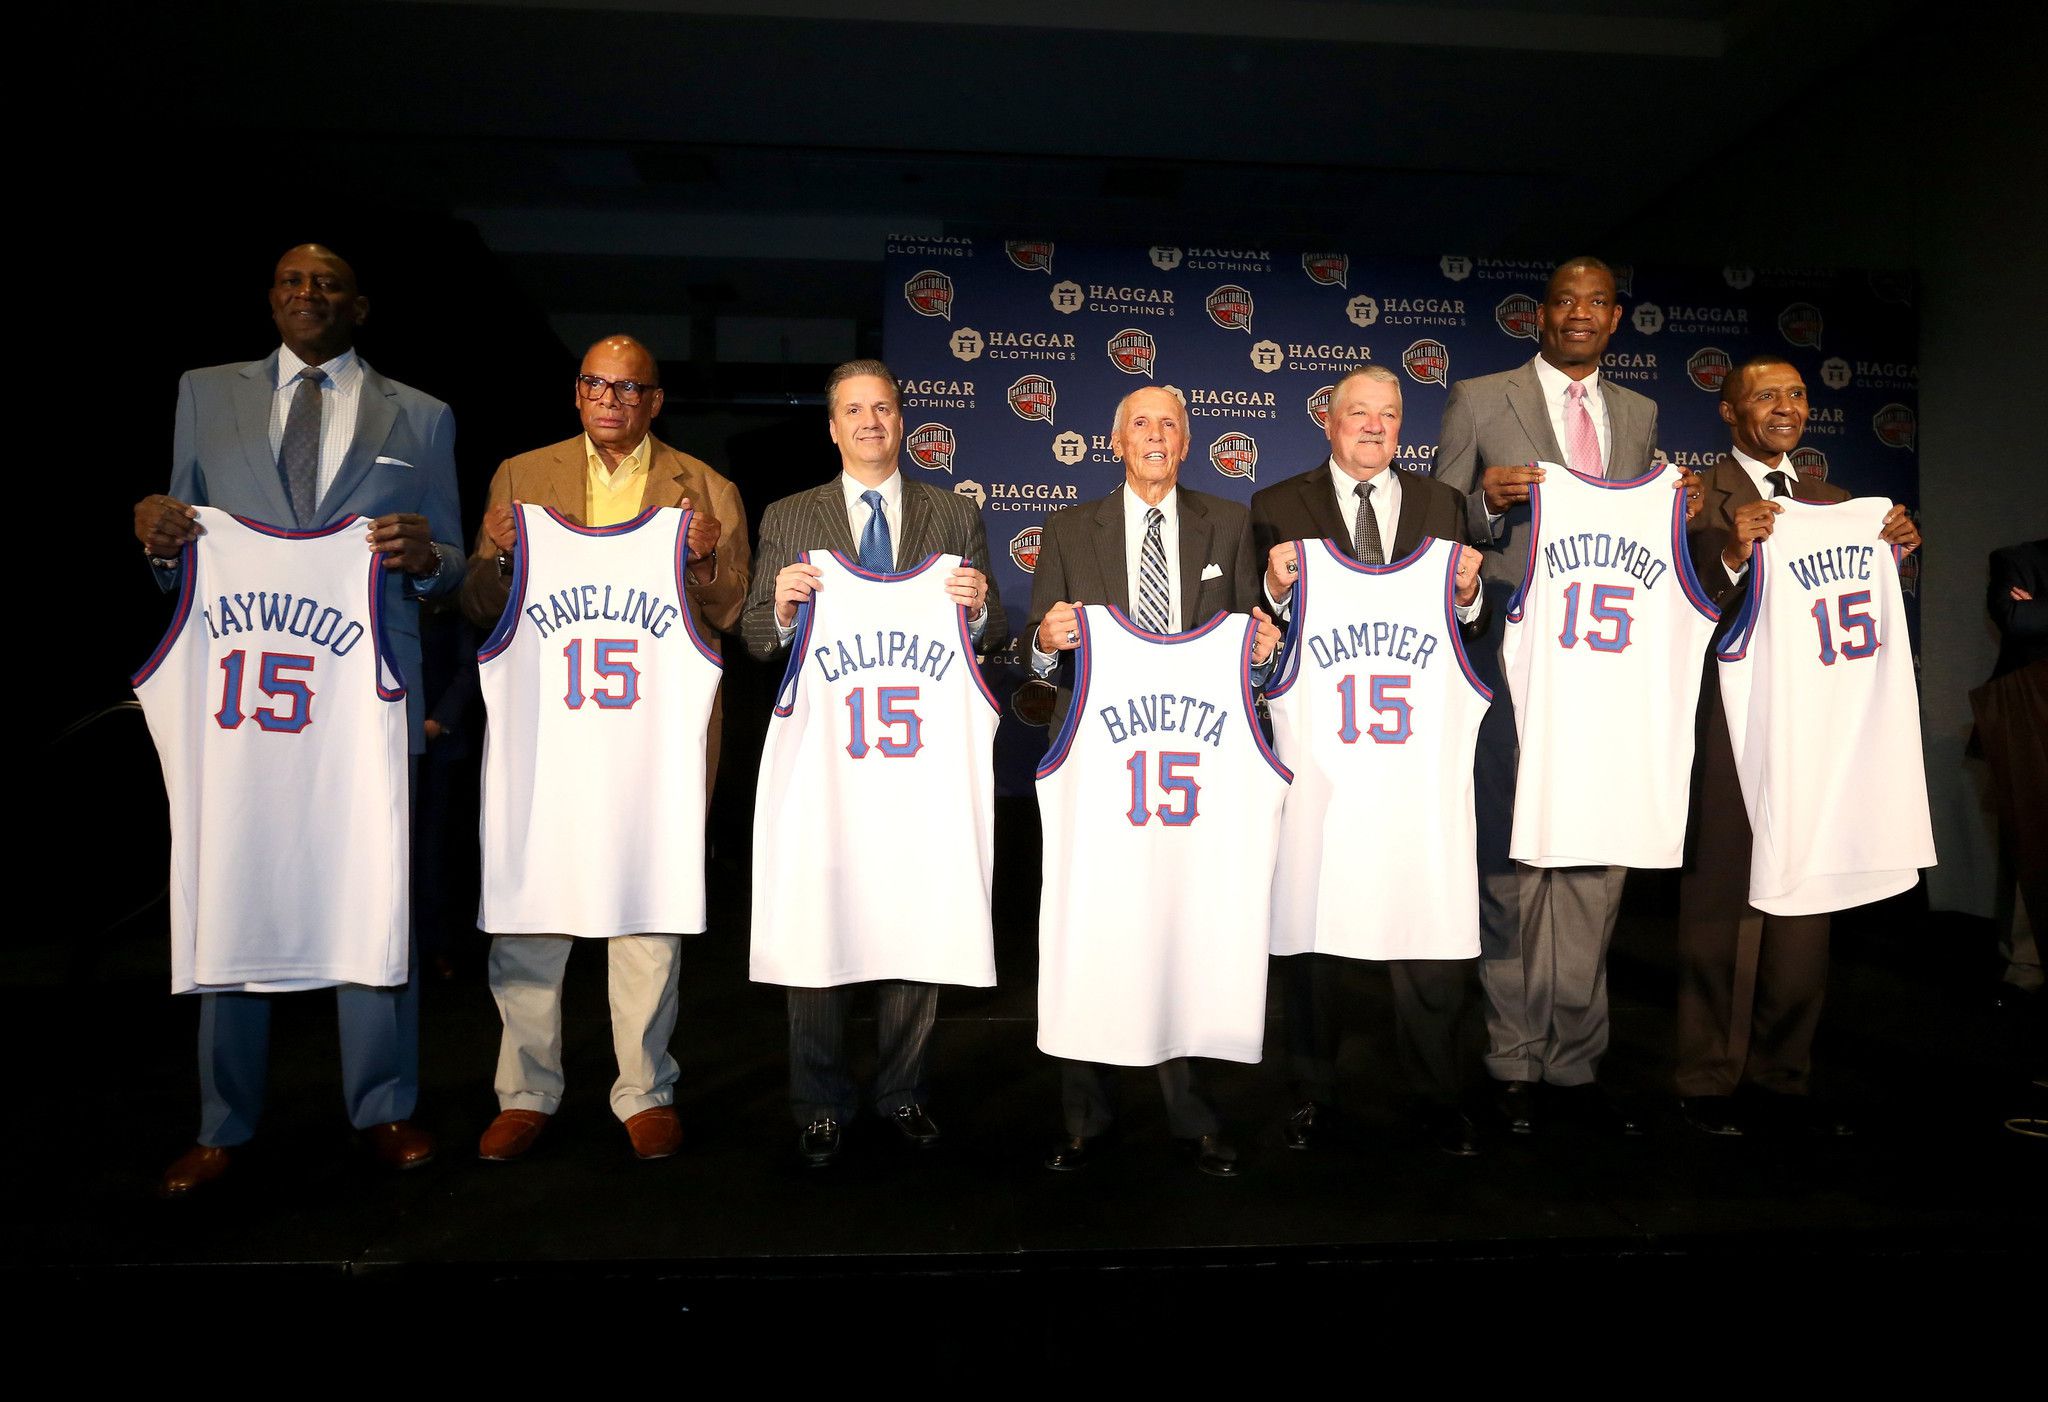 11 new inductees to Naismith Basketball Hall of Fame